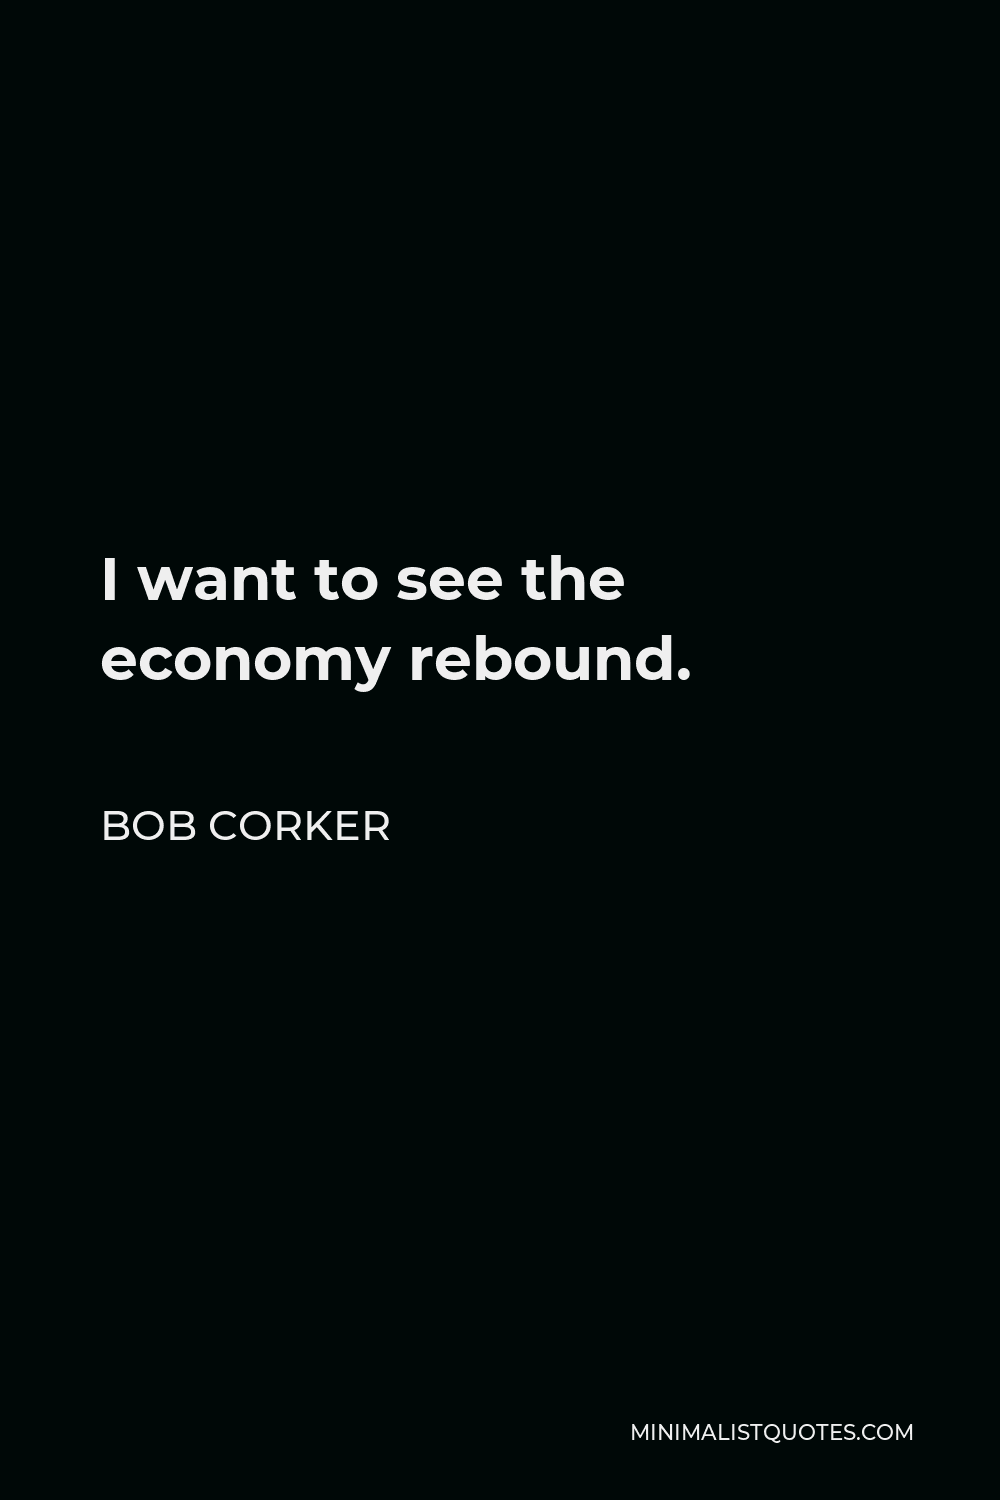 Bob Corker Quote - I want to see the economy rebound.